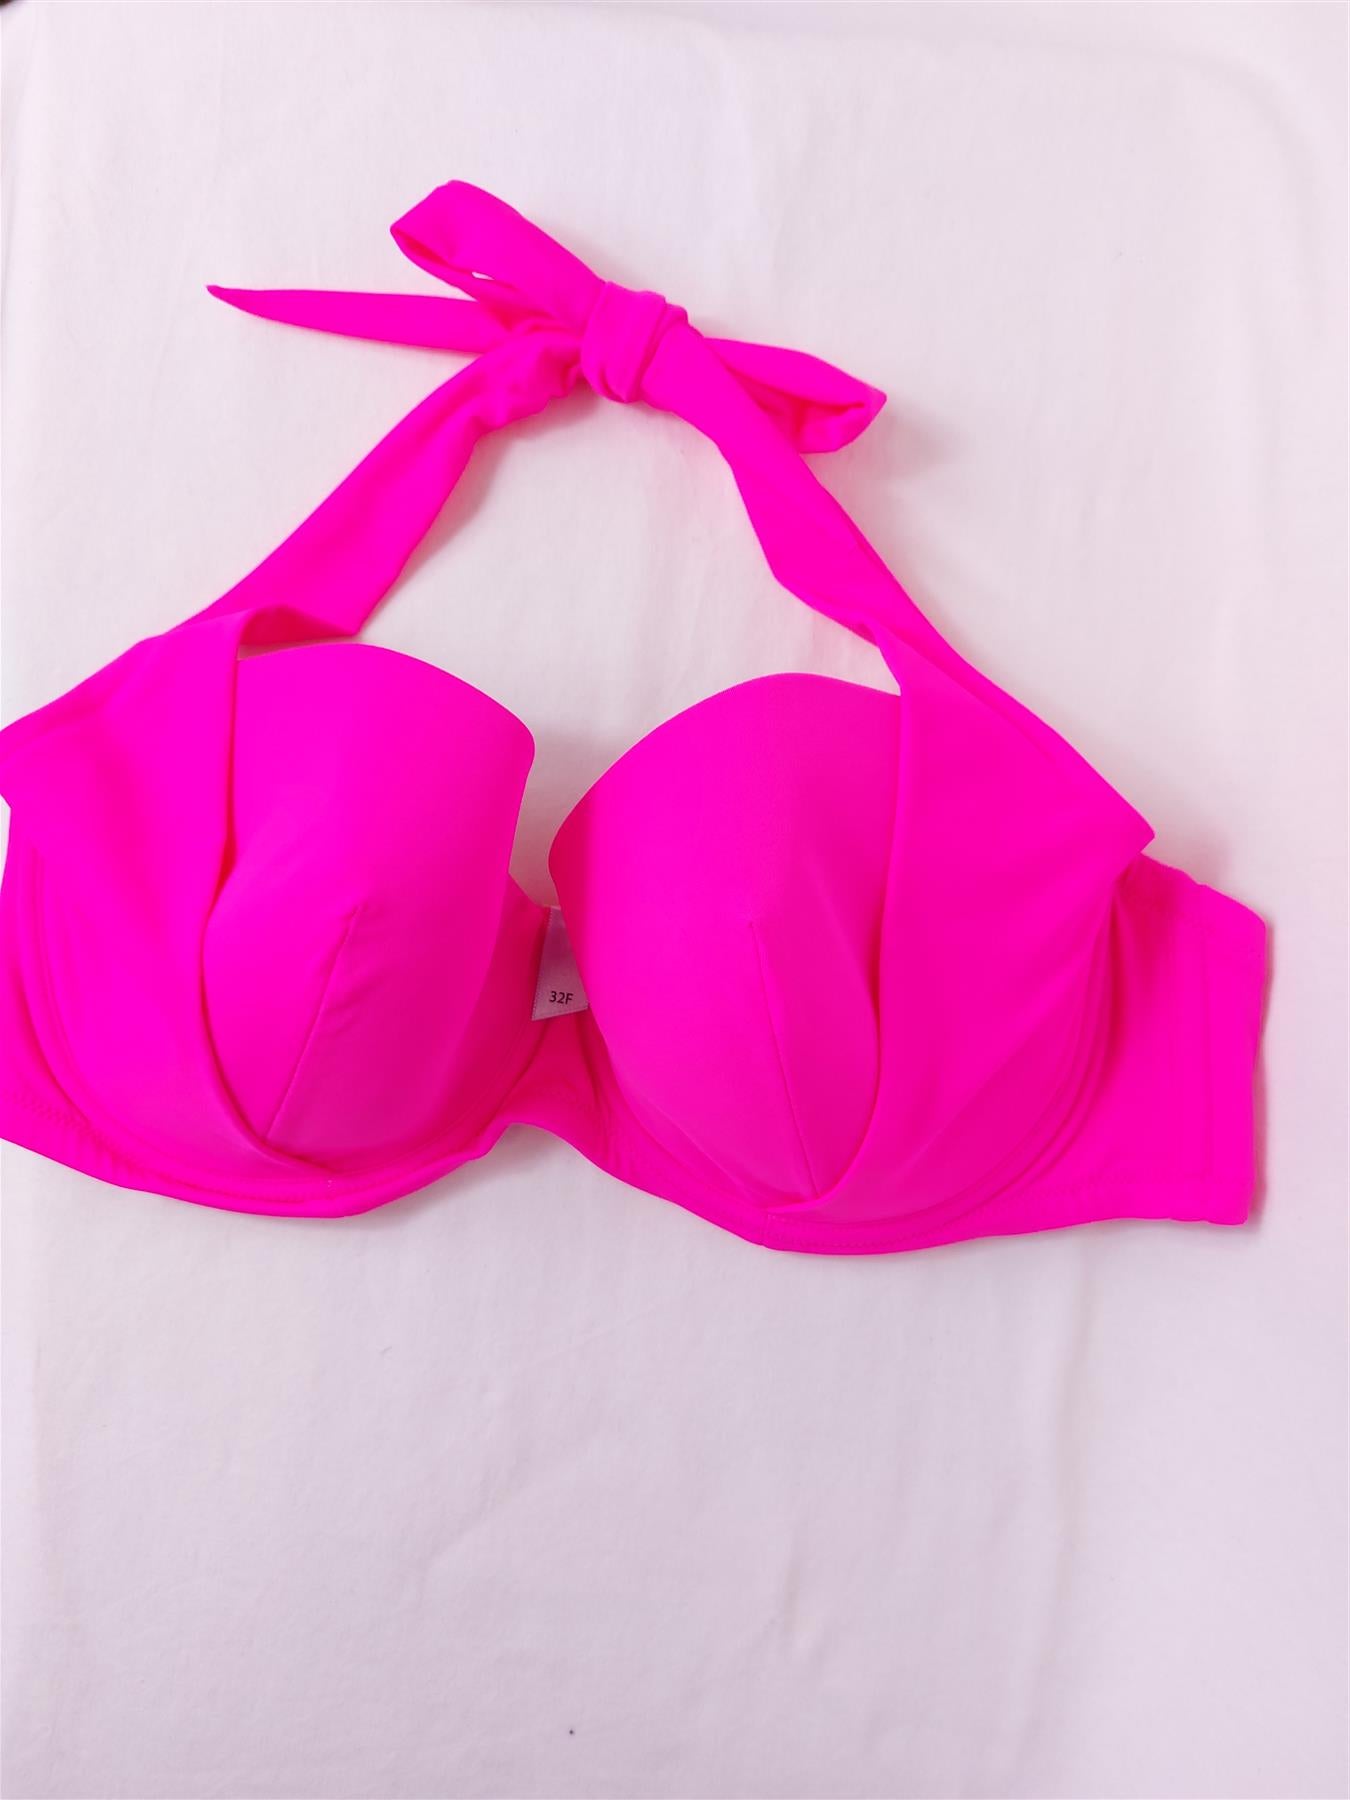 Boux Avenue  Bikini Top and/or Briefs (Sold Seperately)